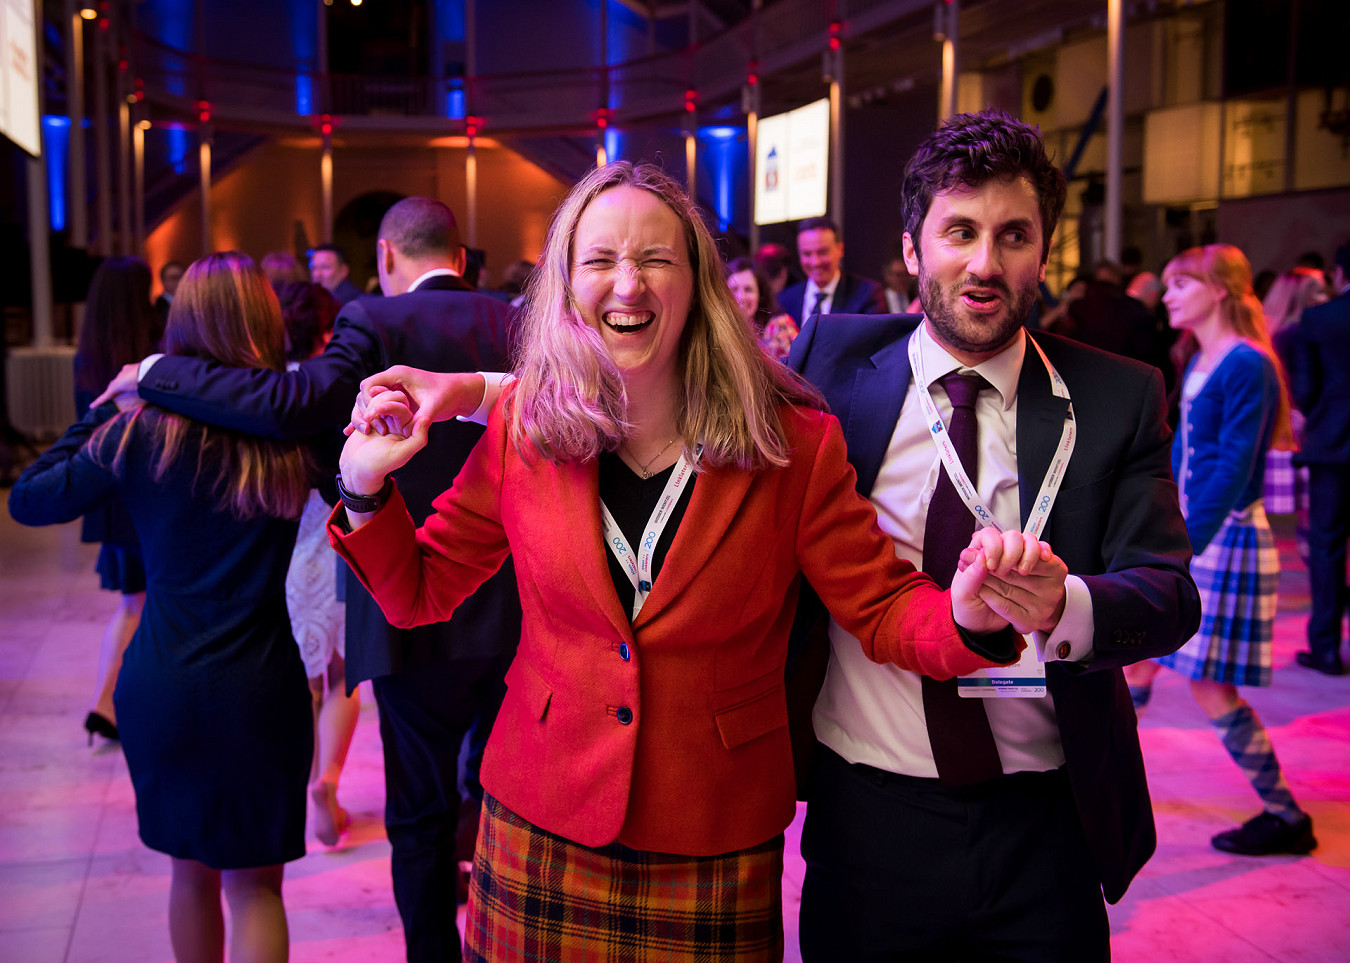 A woman laughs as she and others dance at a ceilidh at the National Museum in Edinburgh